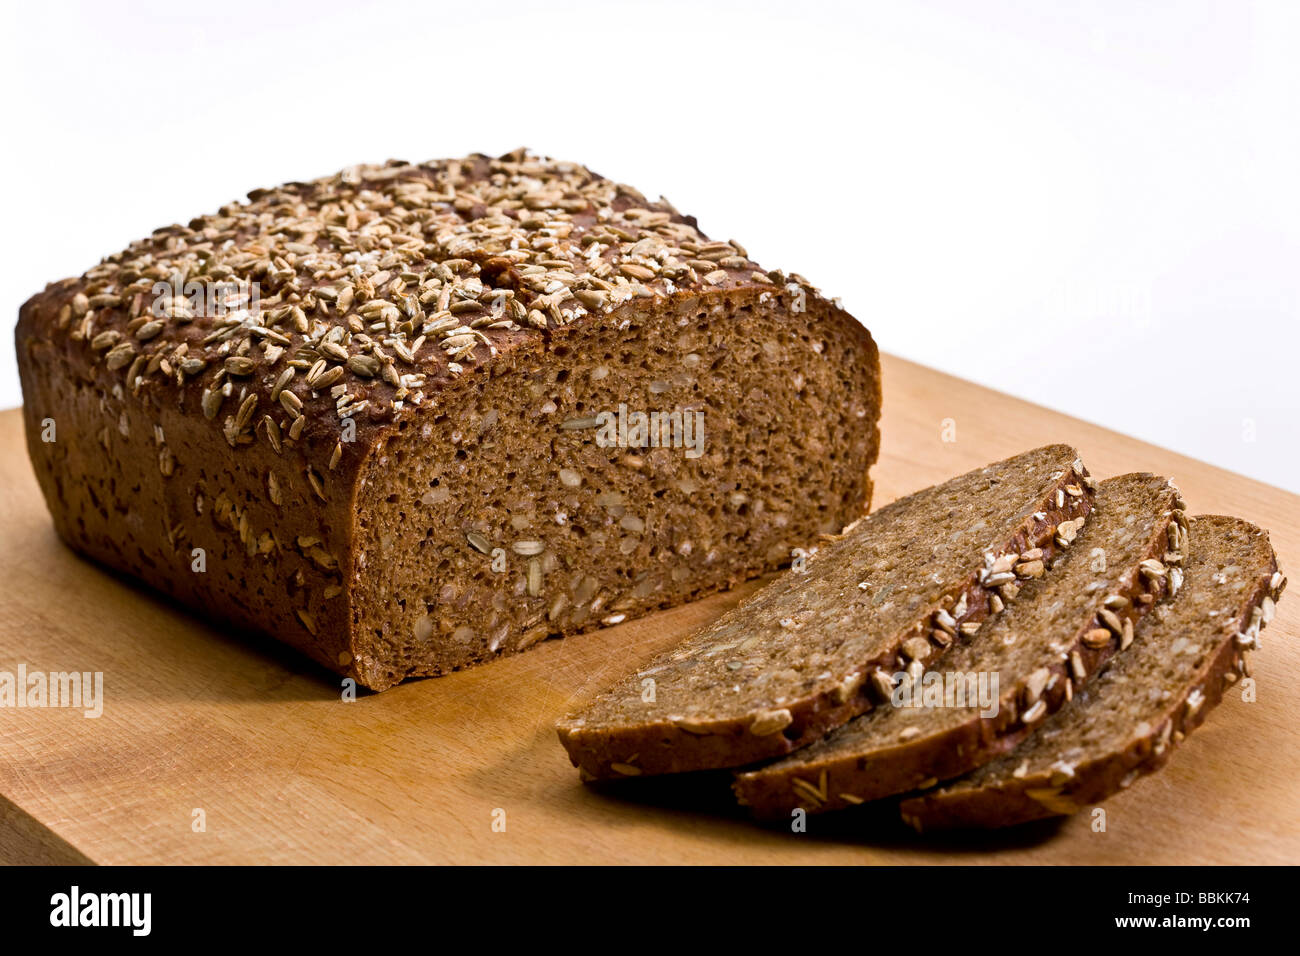 Rye bread with whole grains Stock Photo